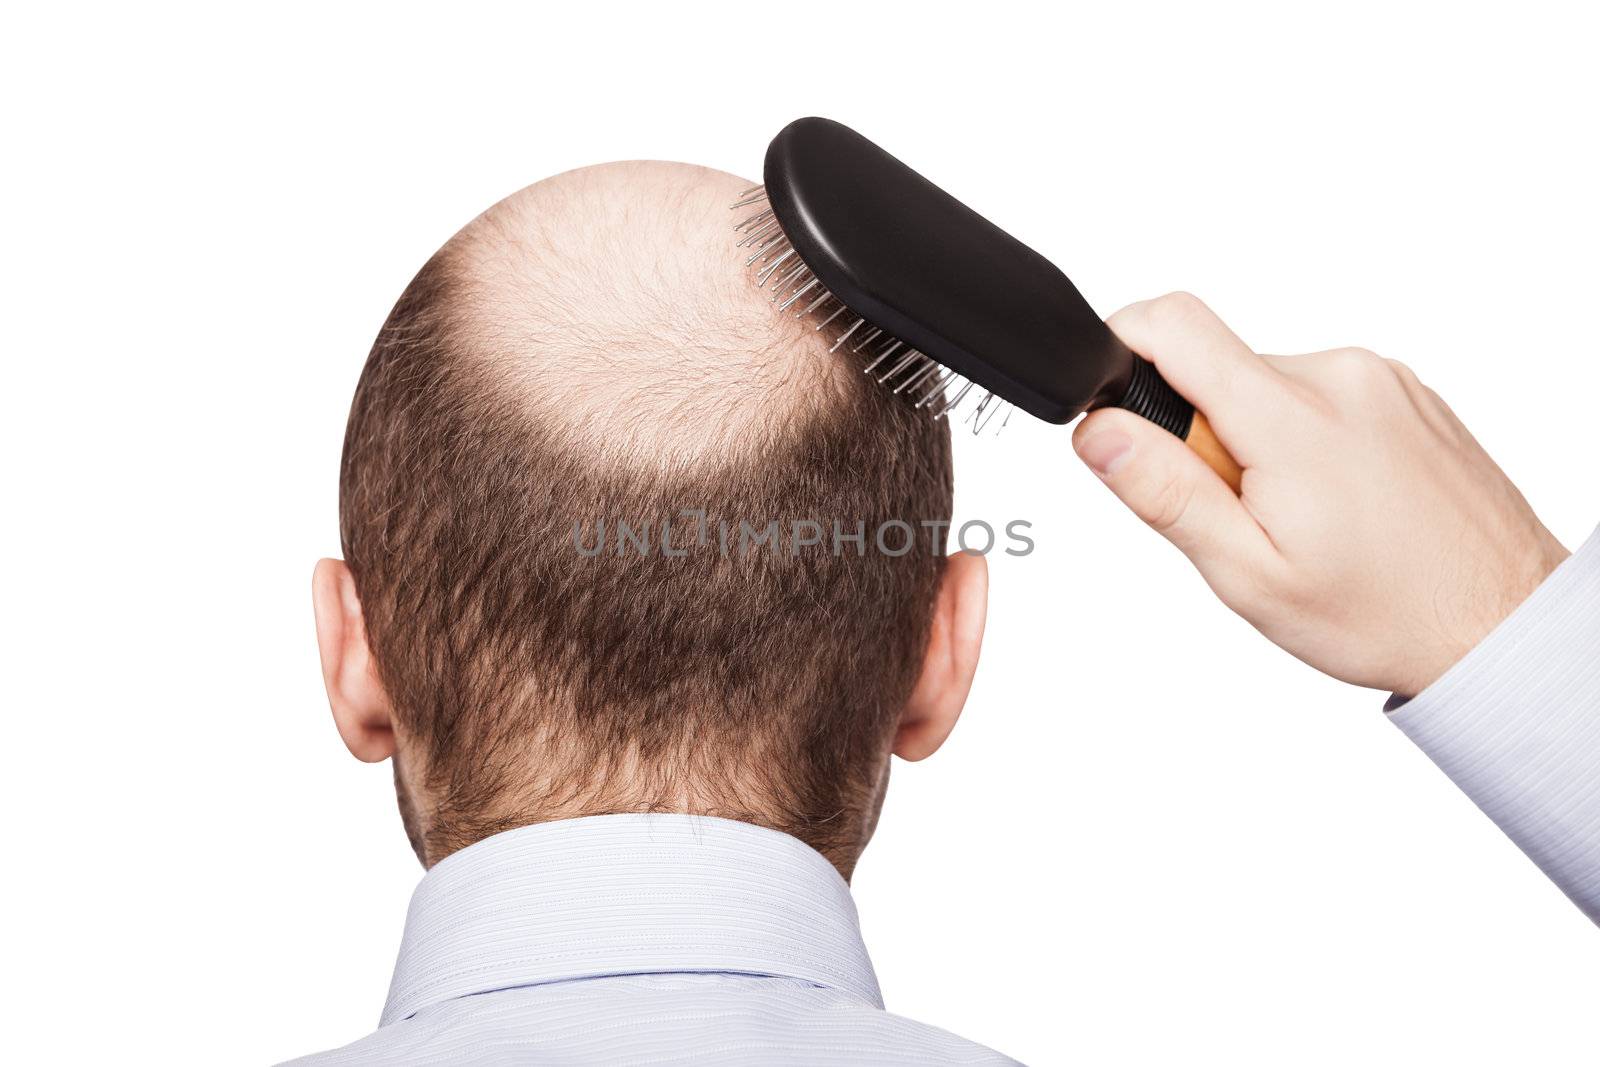 Human alopecia or hair loss - adult man hand holding comb on bald head